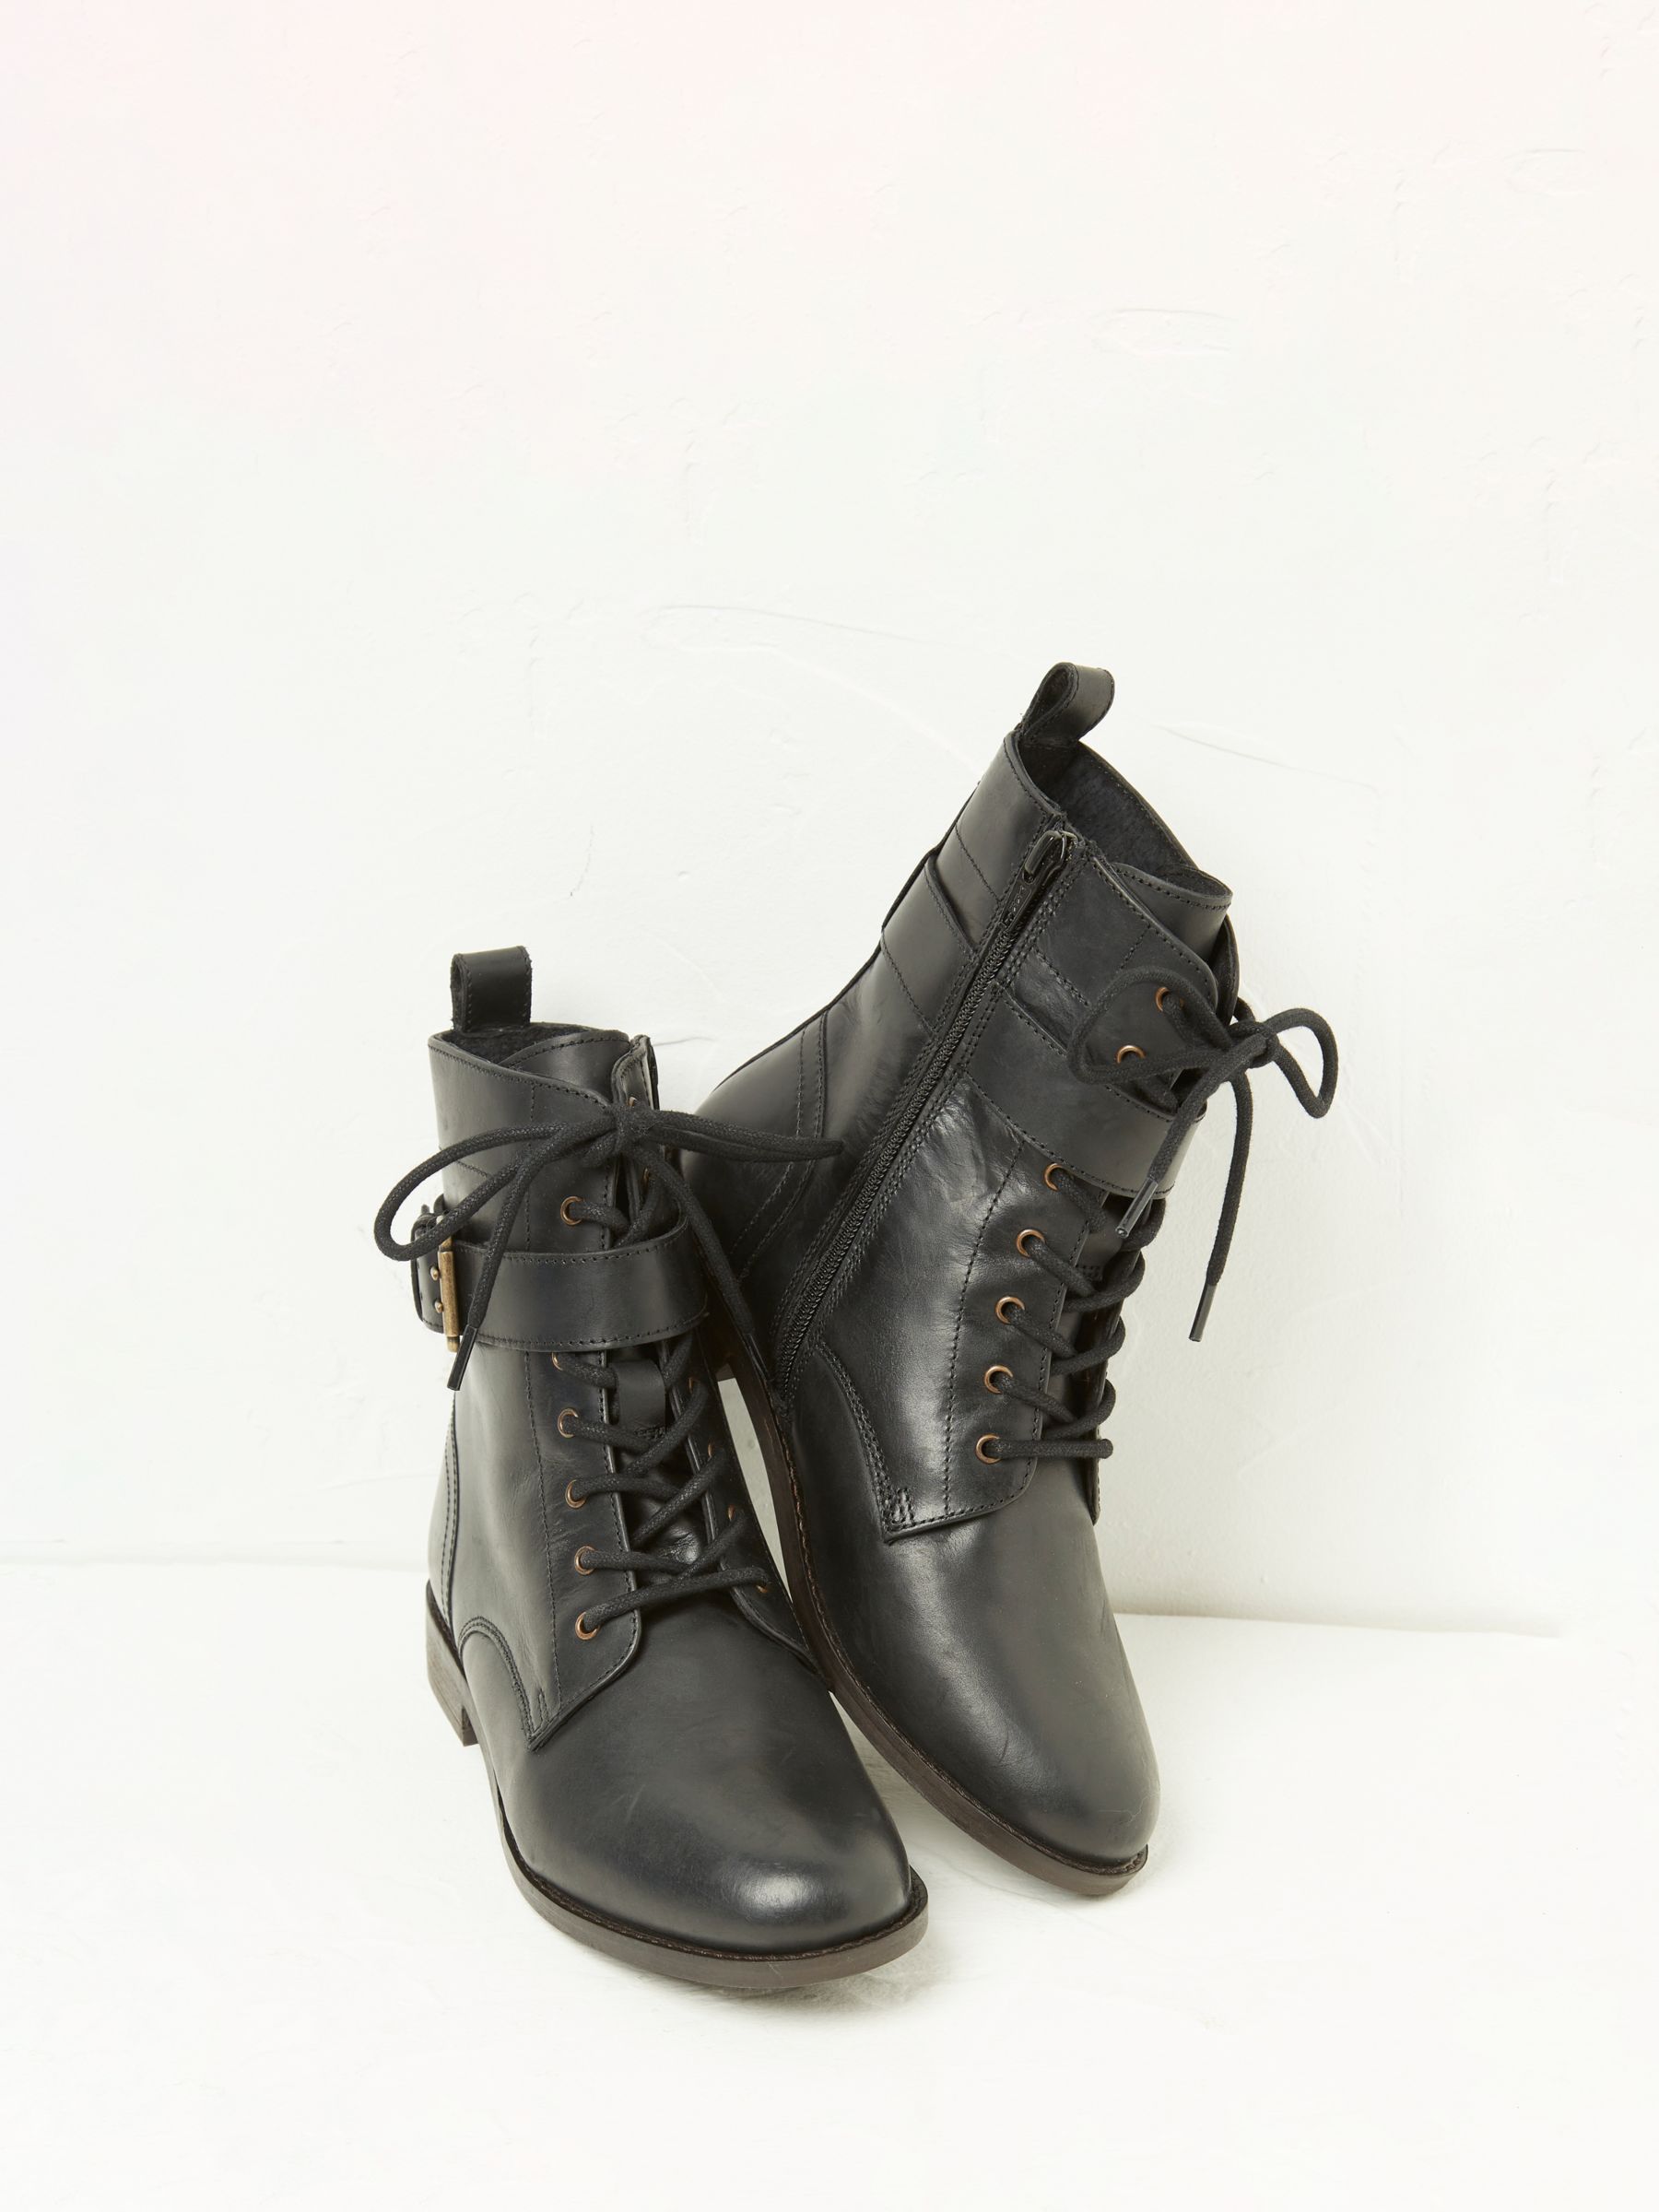 Ruby Flat Ankle Boot - Women - Shoes